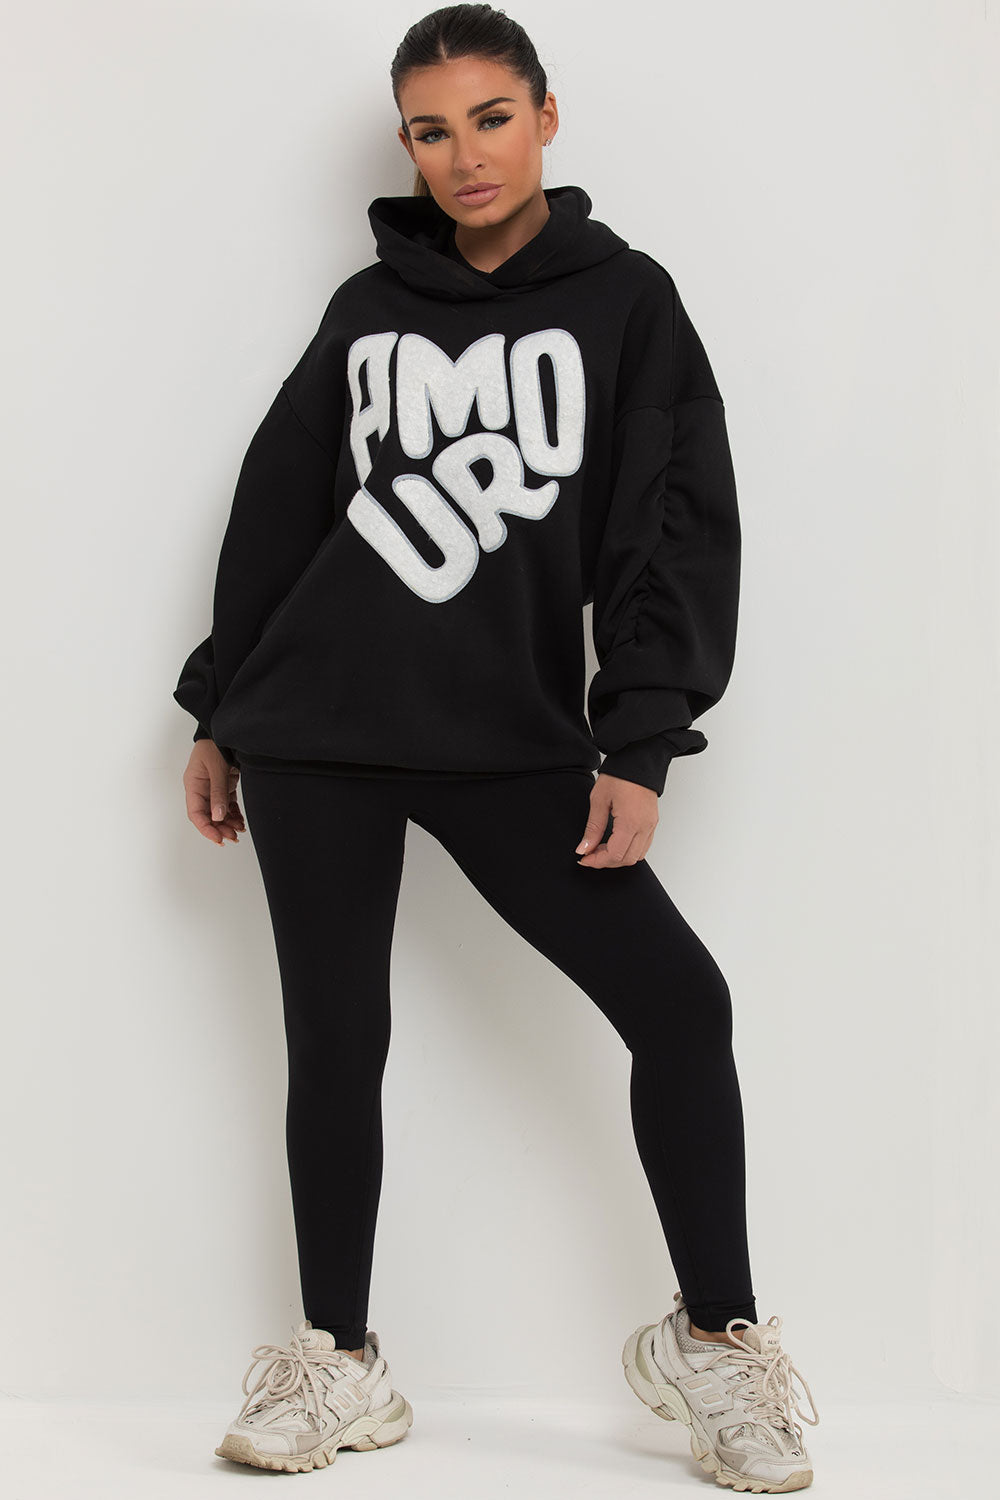 amour oversized hoodie womens